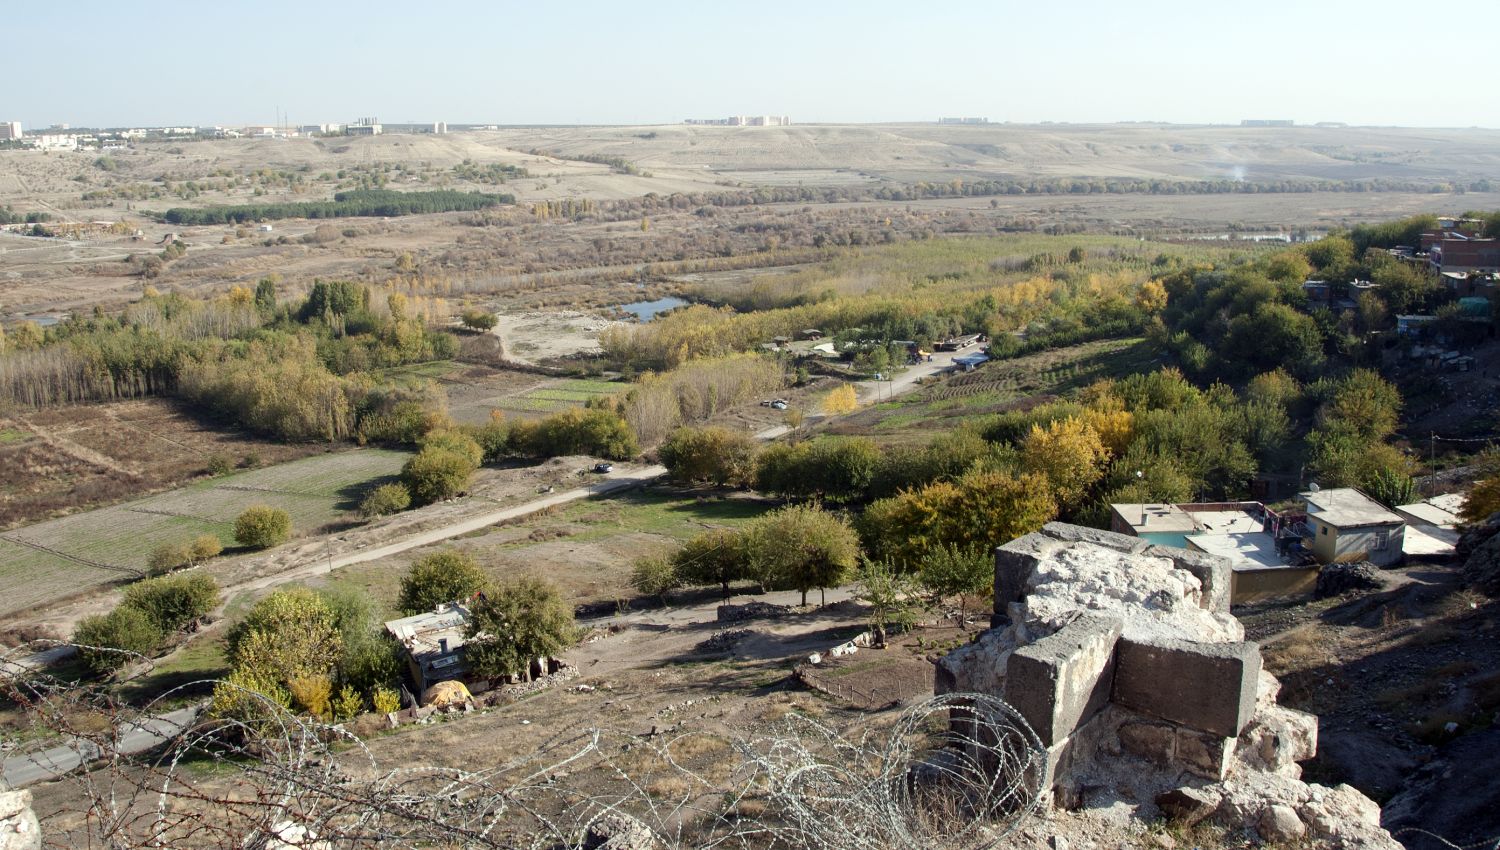 View of Tigris basin from walls near northeastern corner of old city.